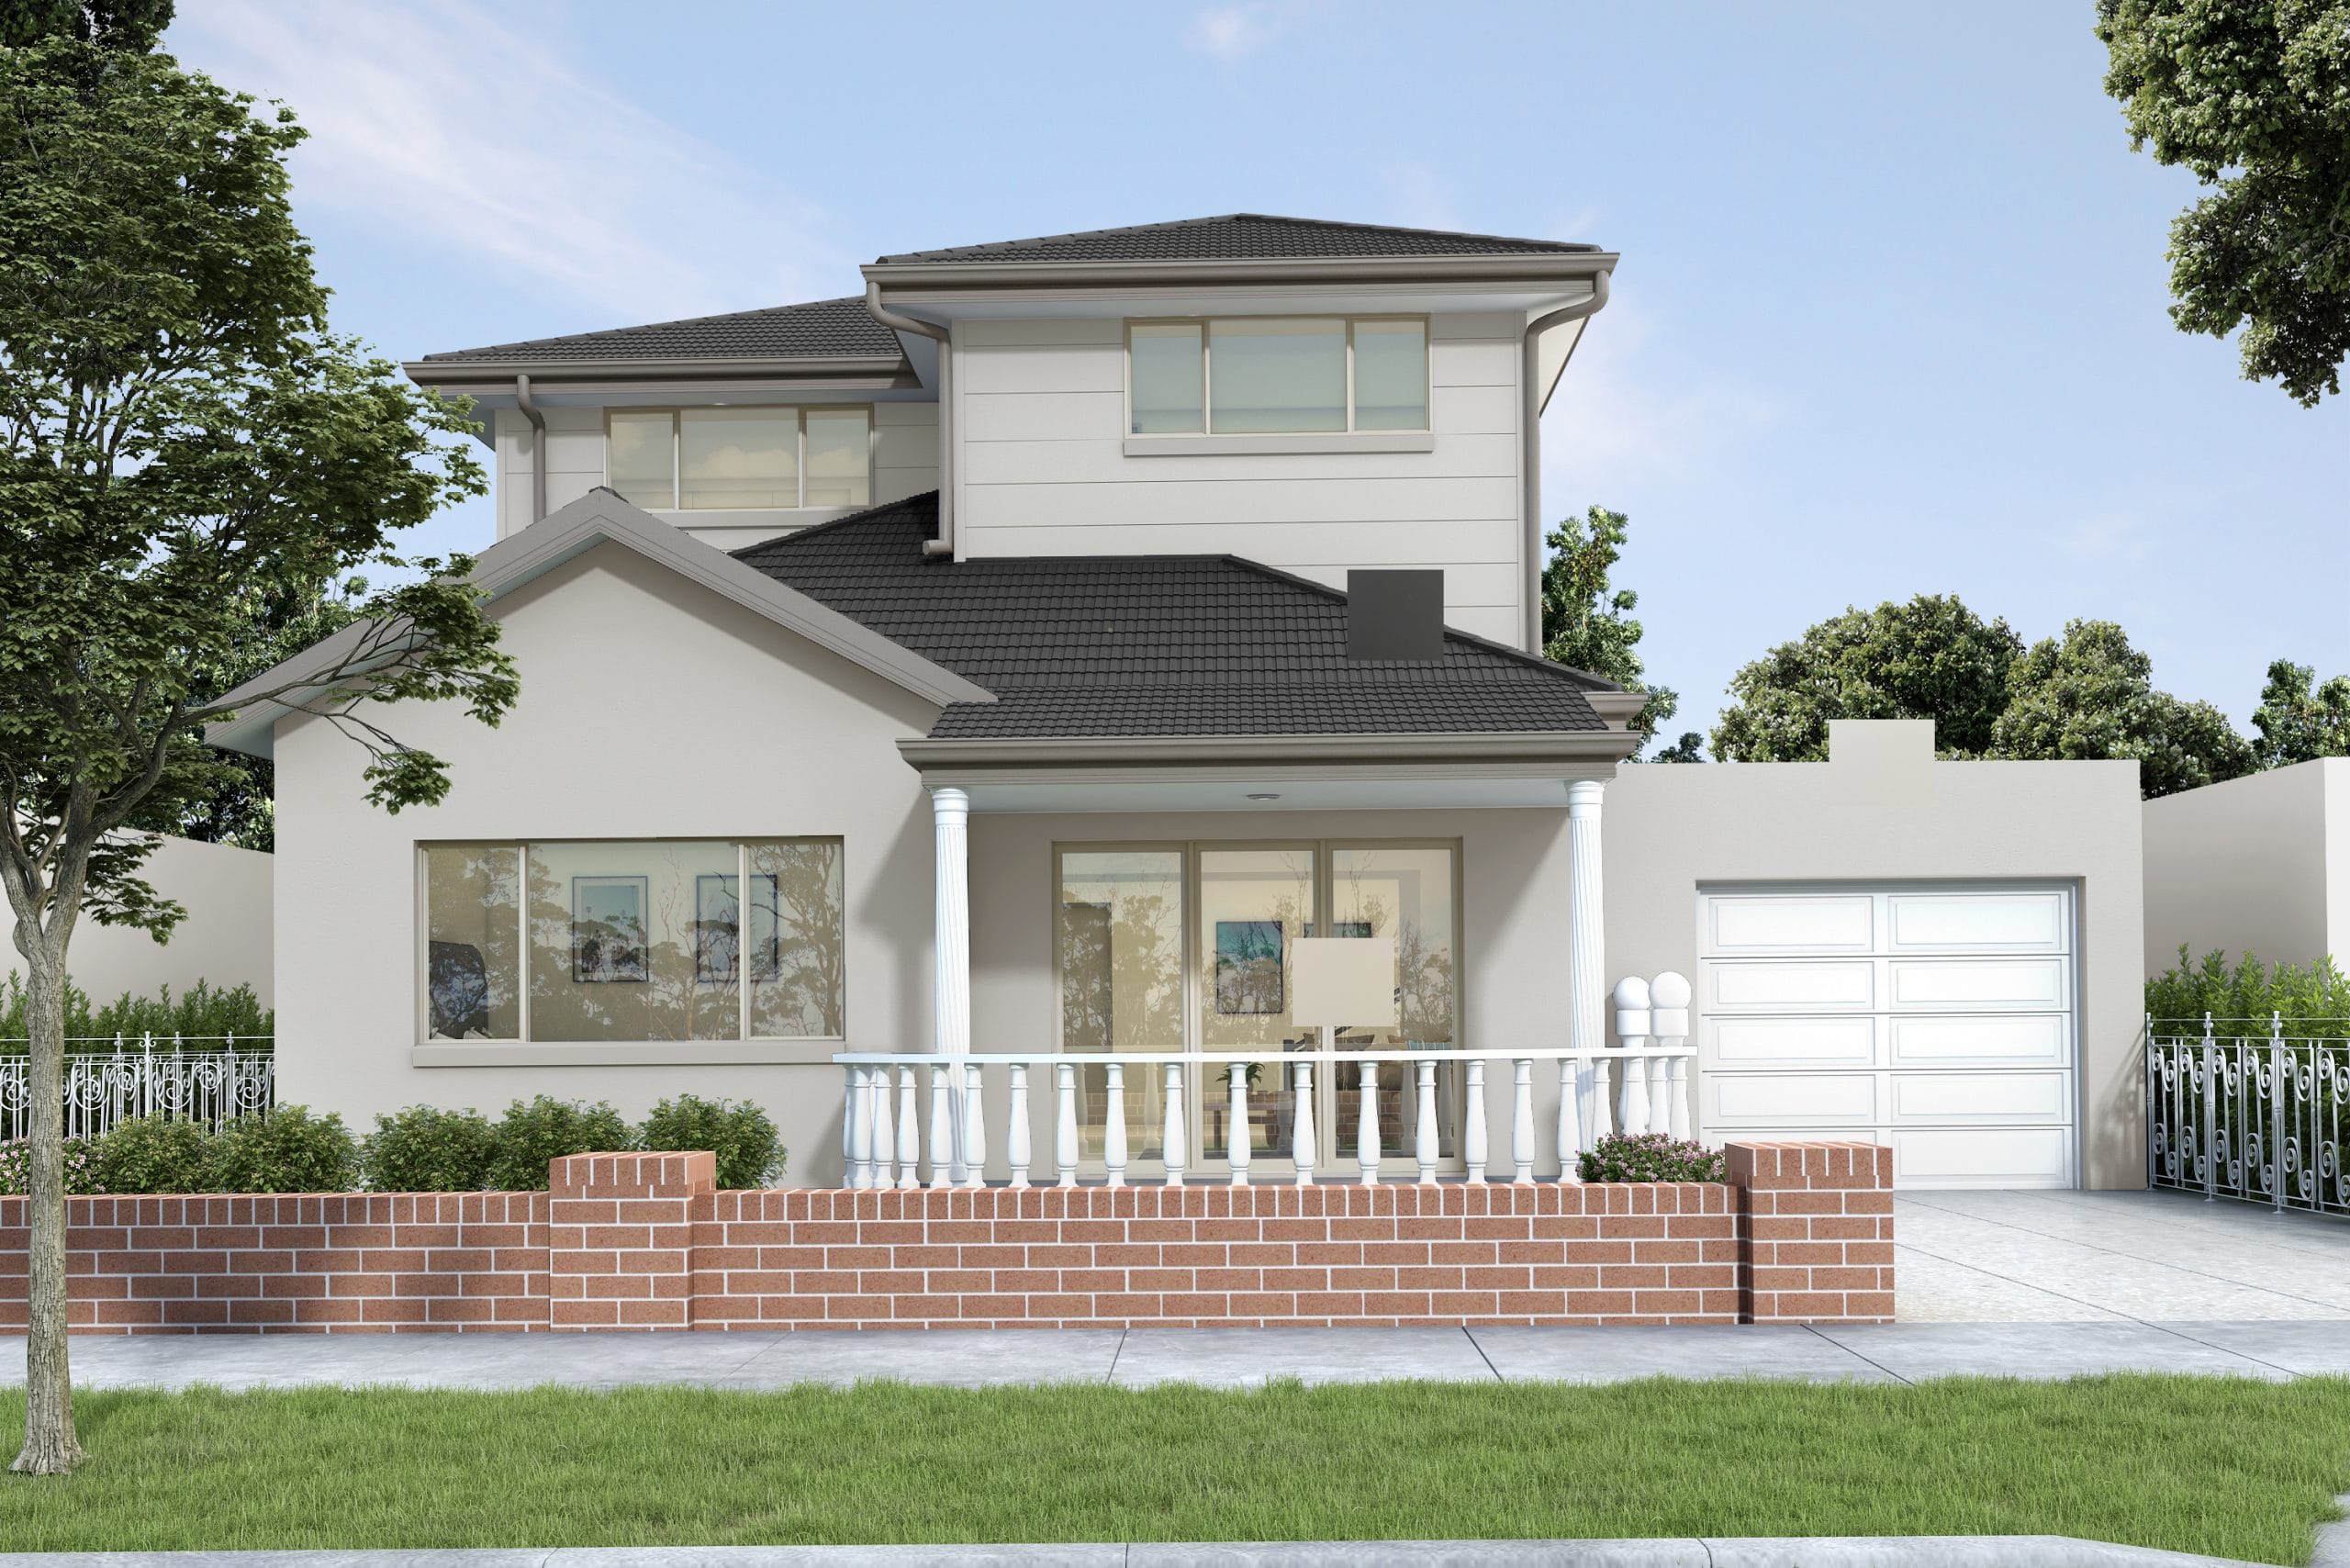 Render of a first floor addition to a home in Lakemba